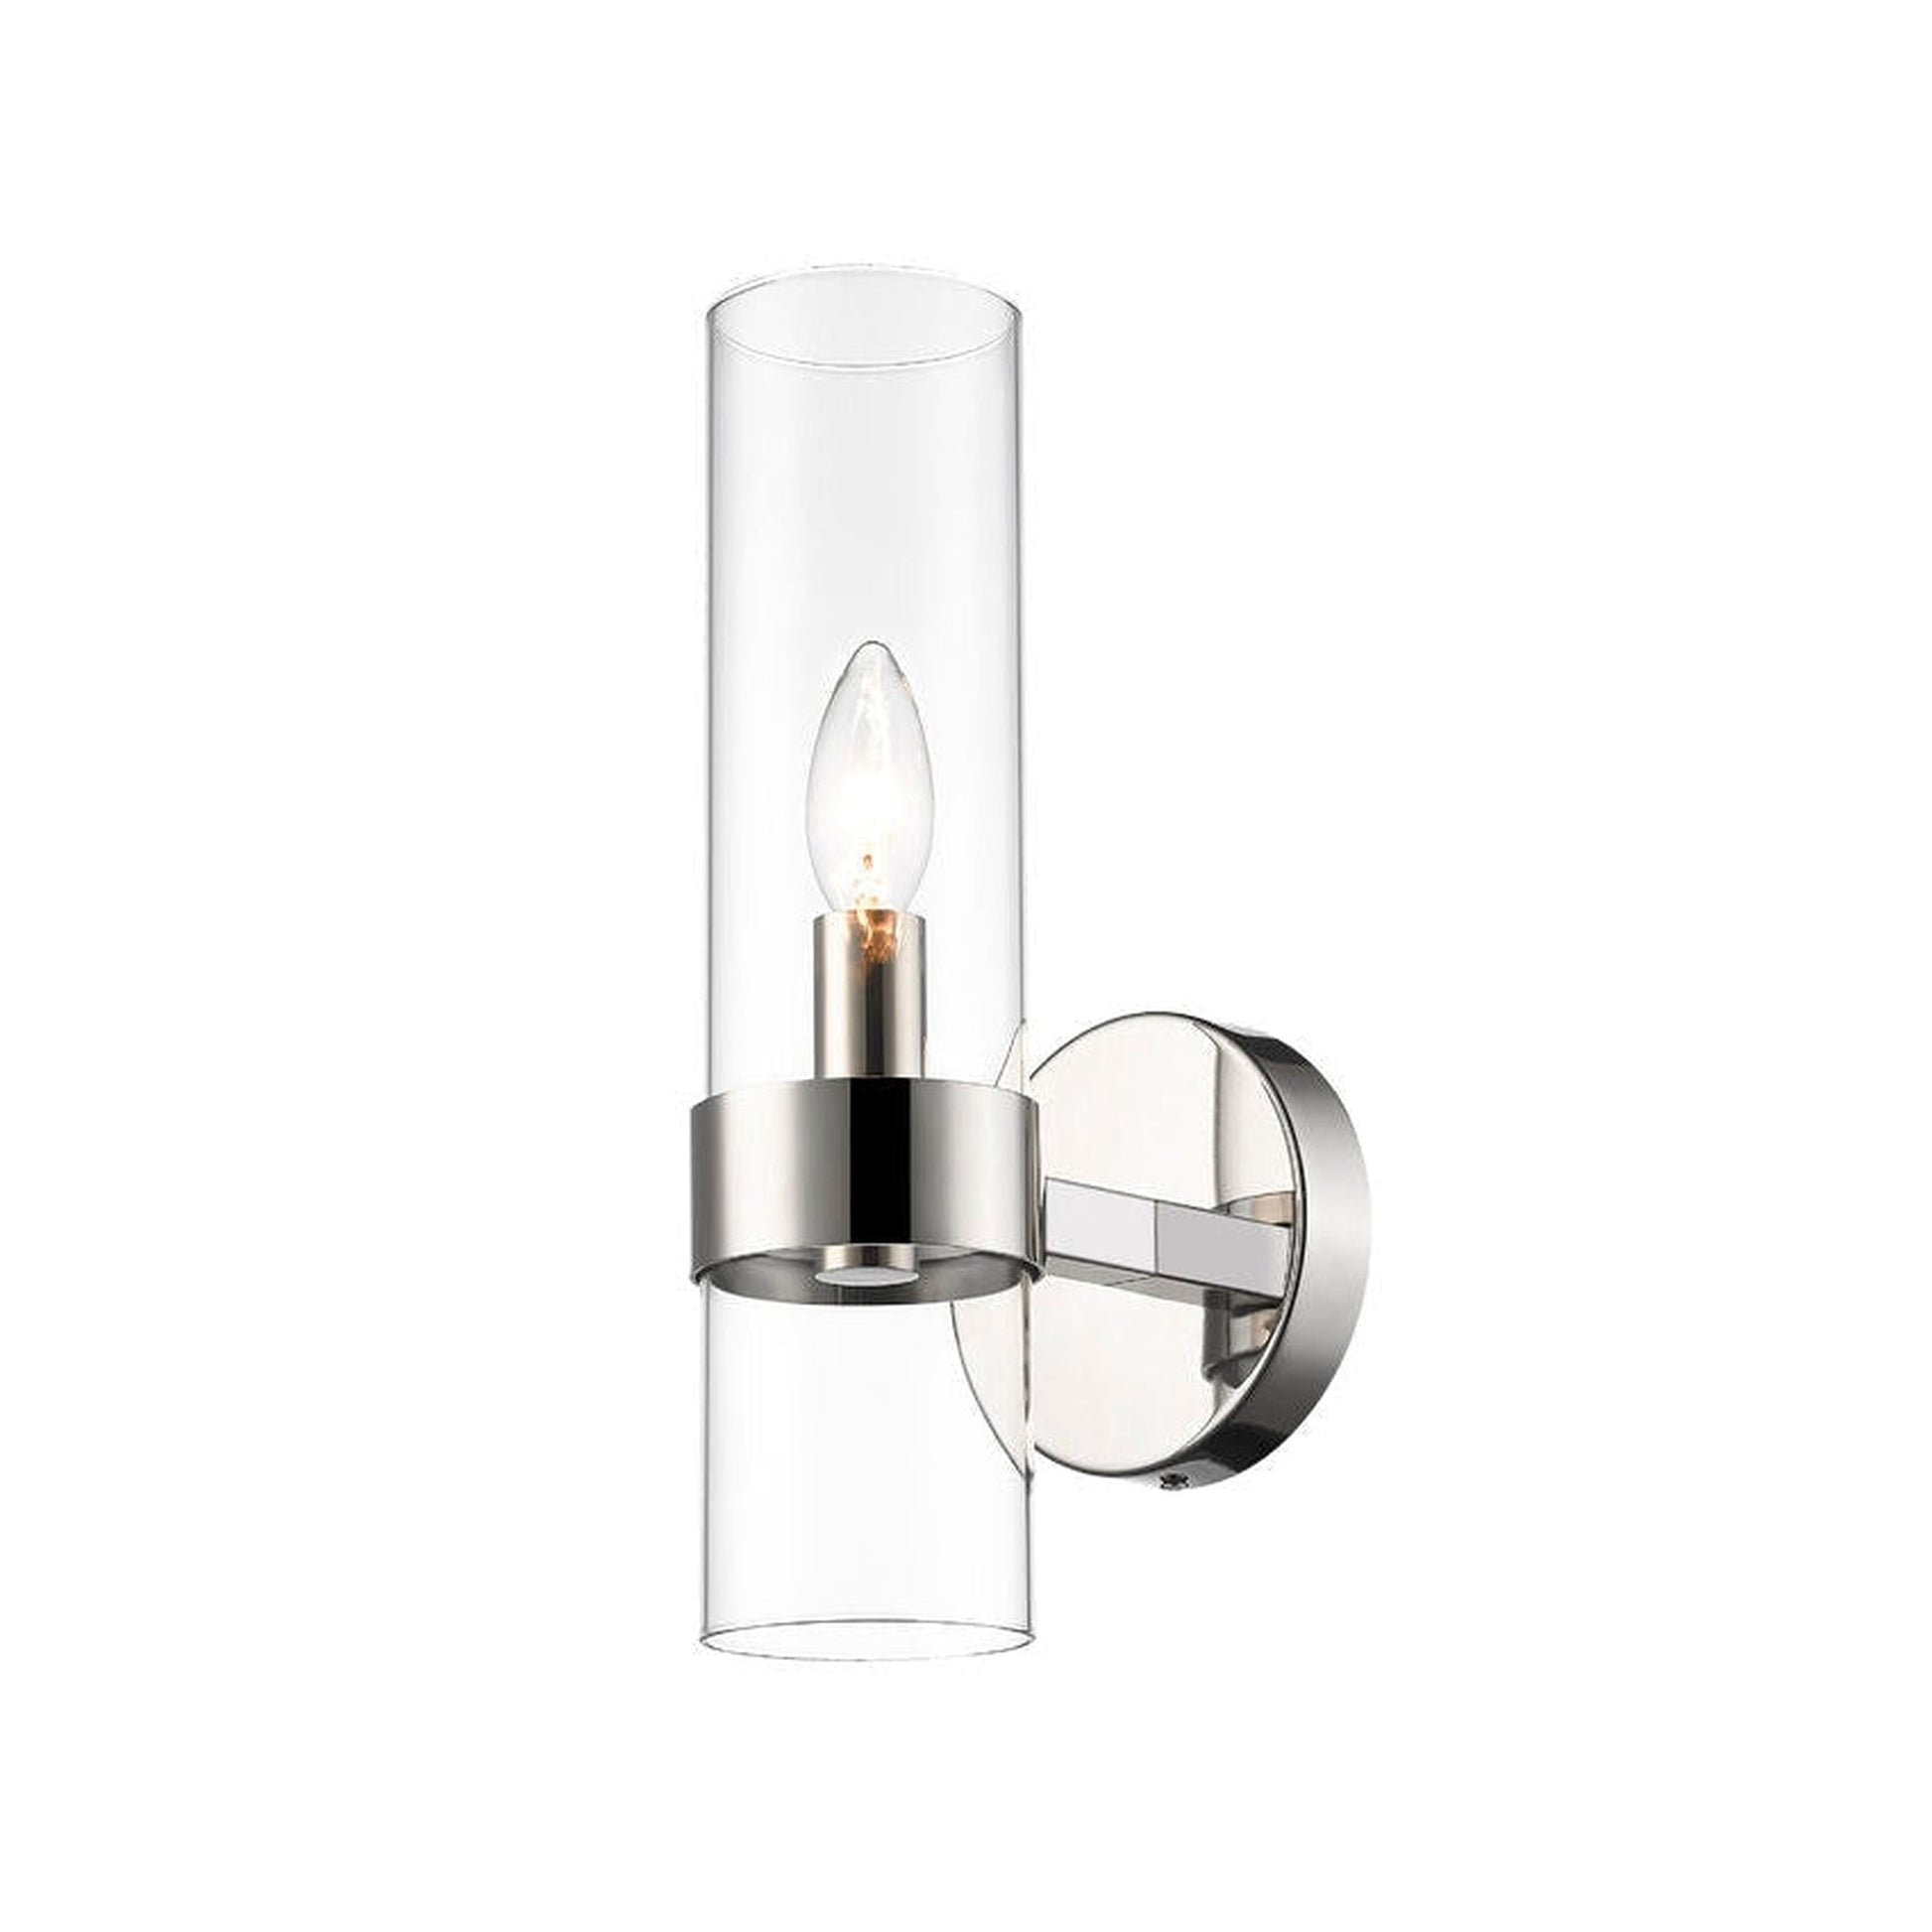 Z-Lite Datus 7" 1-Light Polished Nickel Wall Sconce With Clear Glass Shade